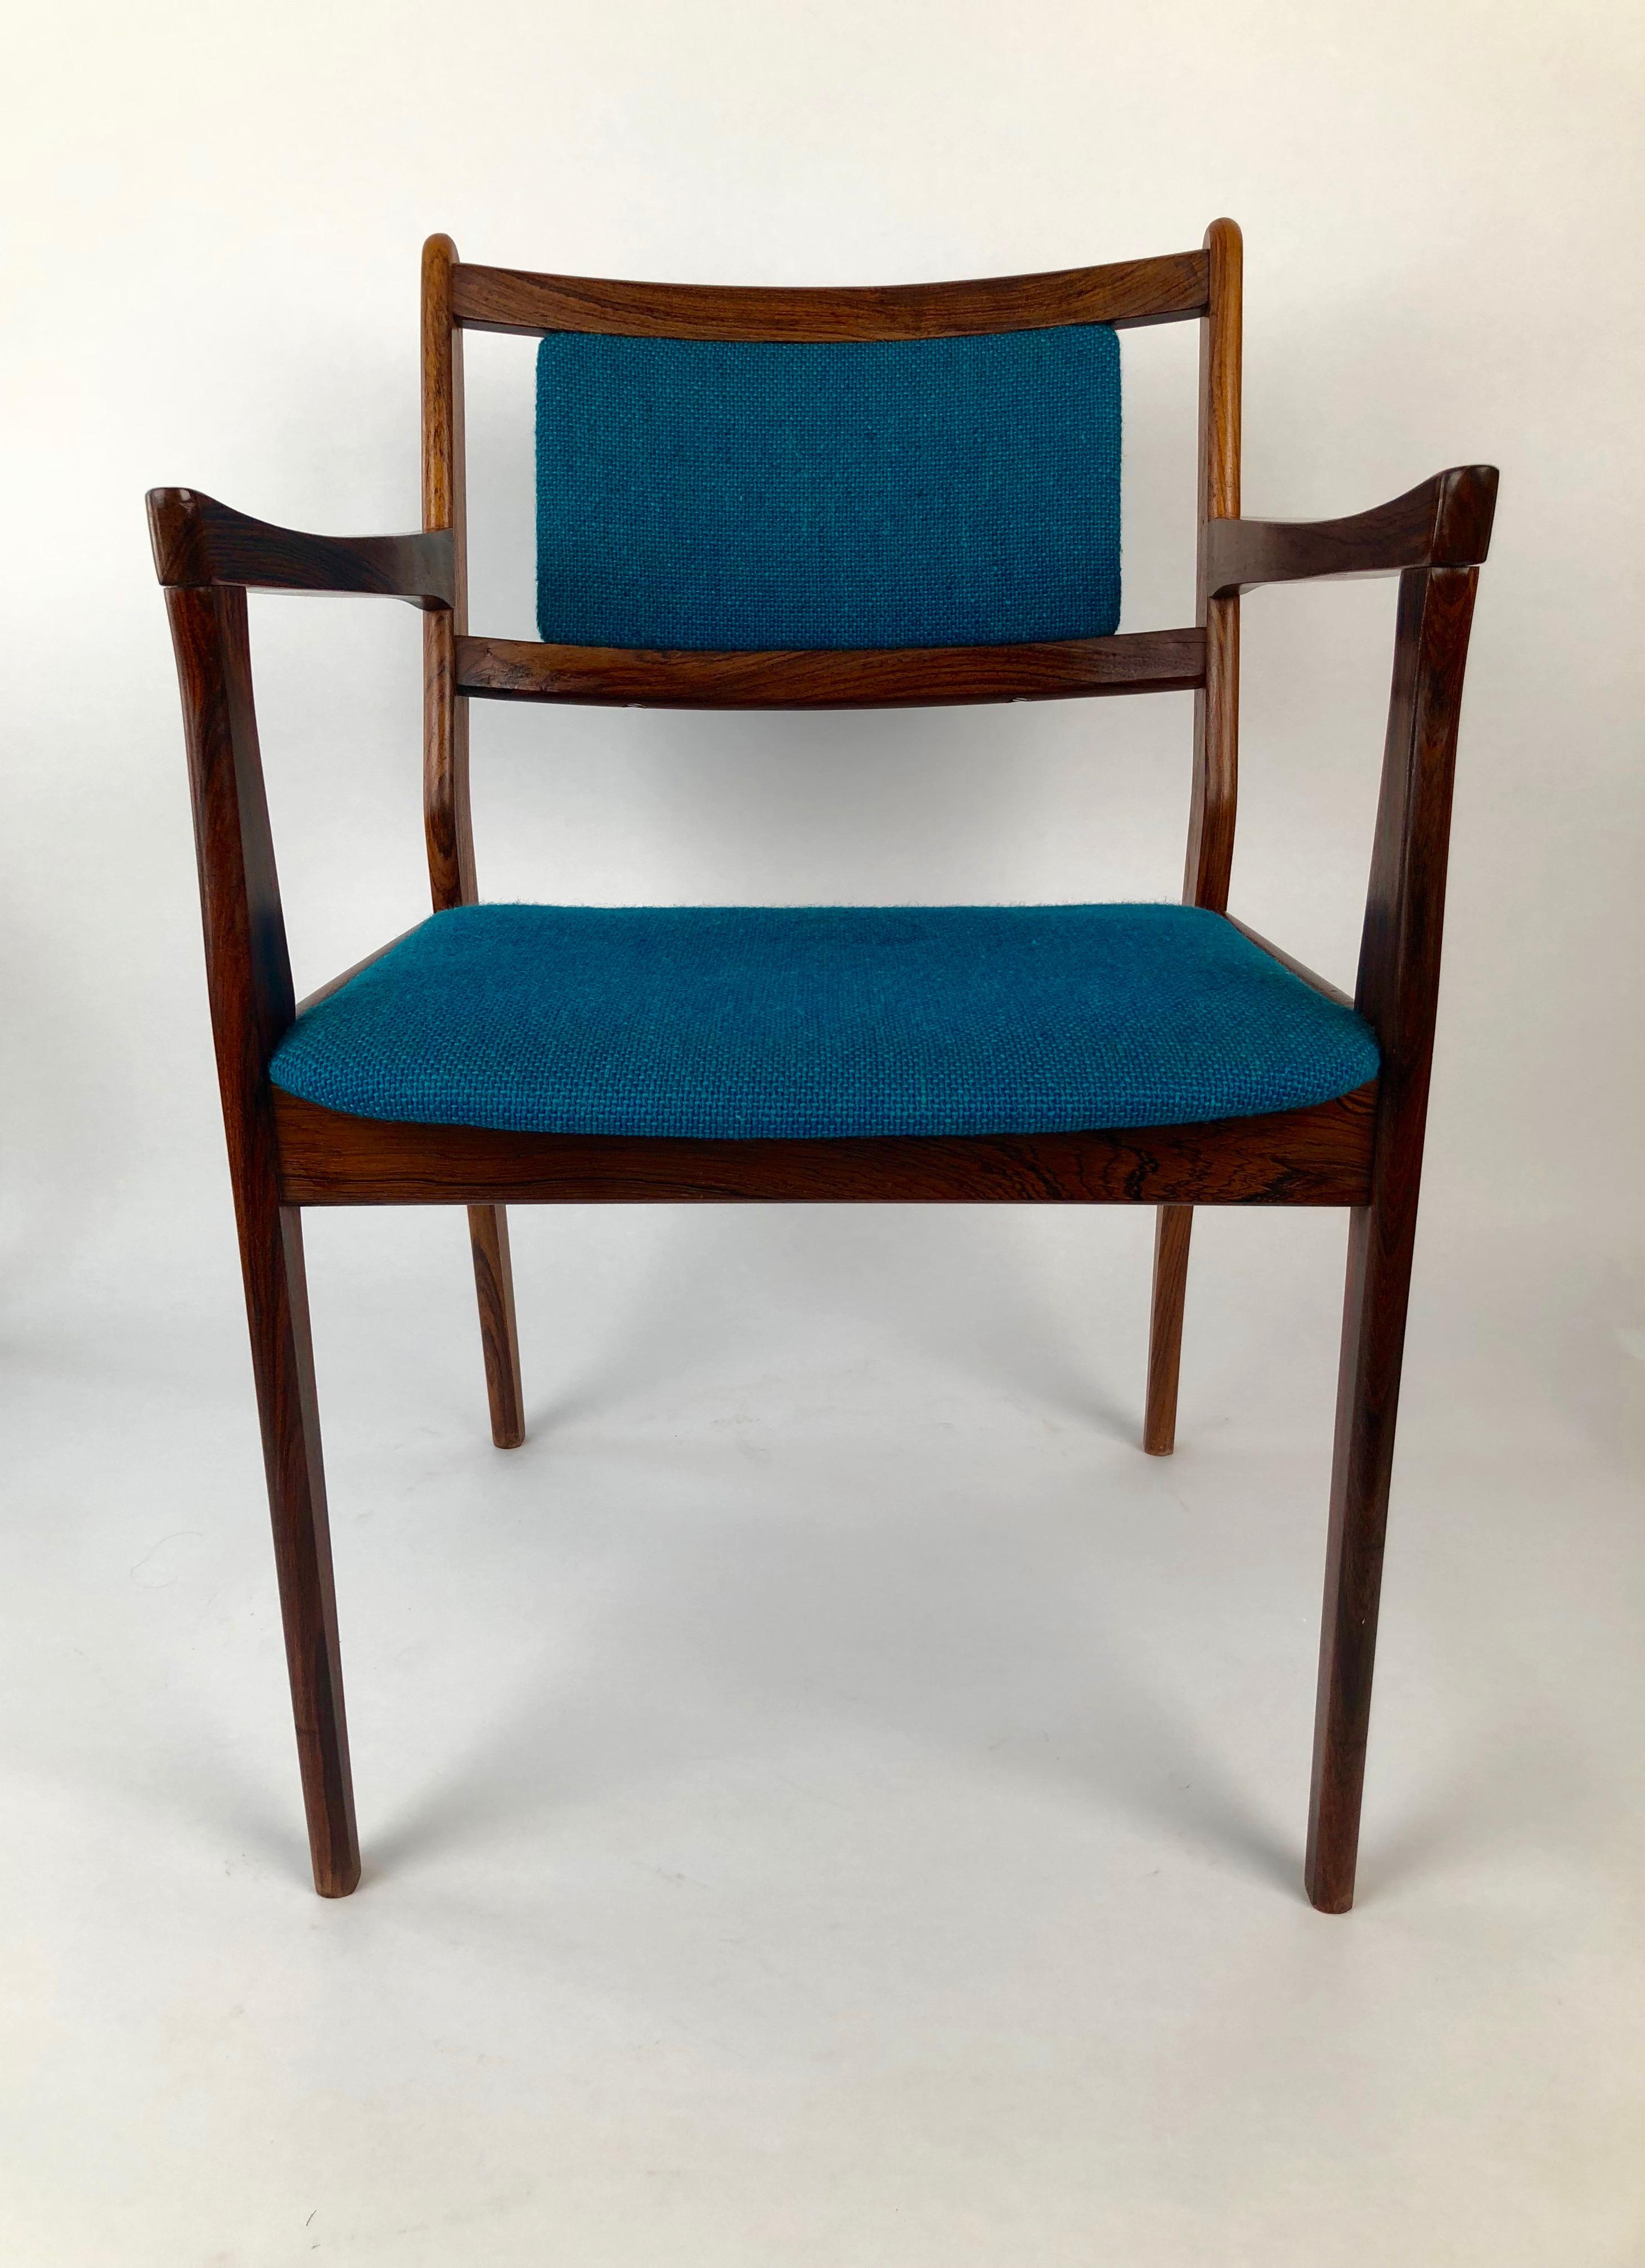 Pair of Palisander armchairs with original turquoise fabric from 1960s.
The chairs are original and in a very good condition.
   